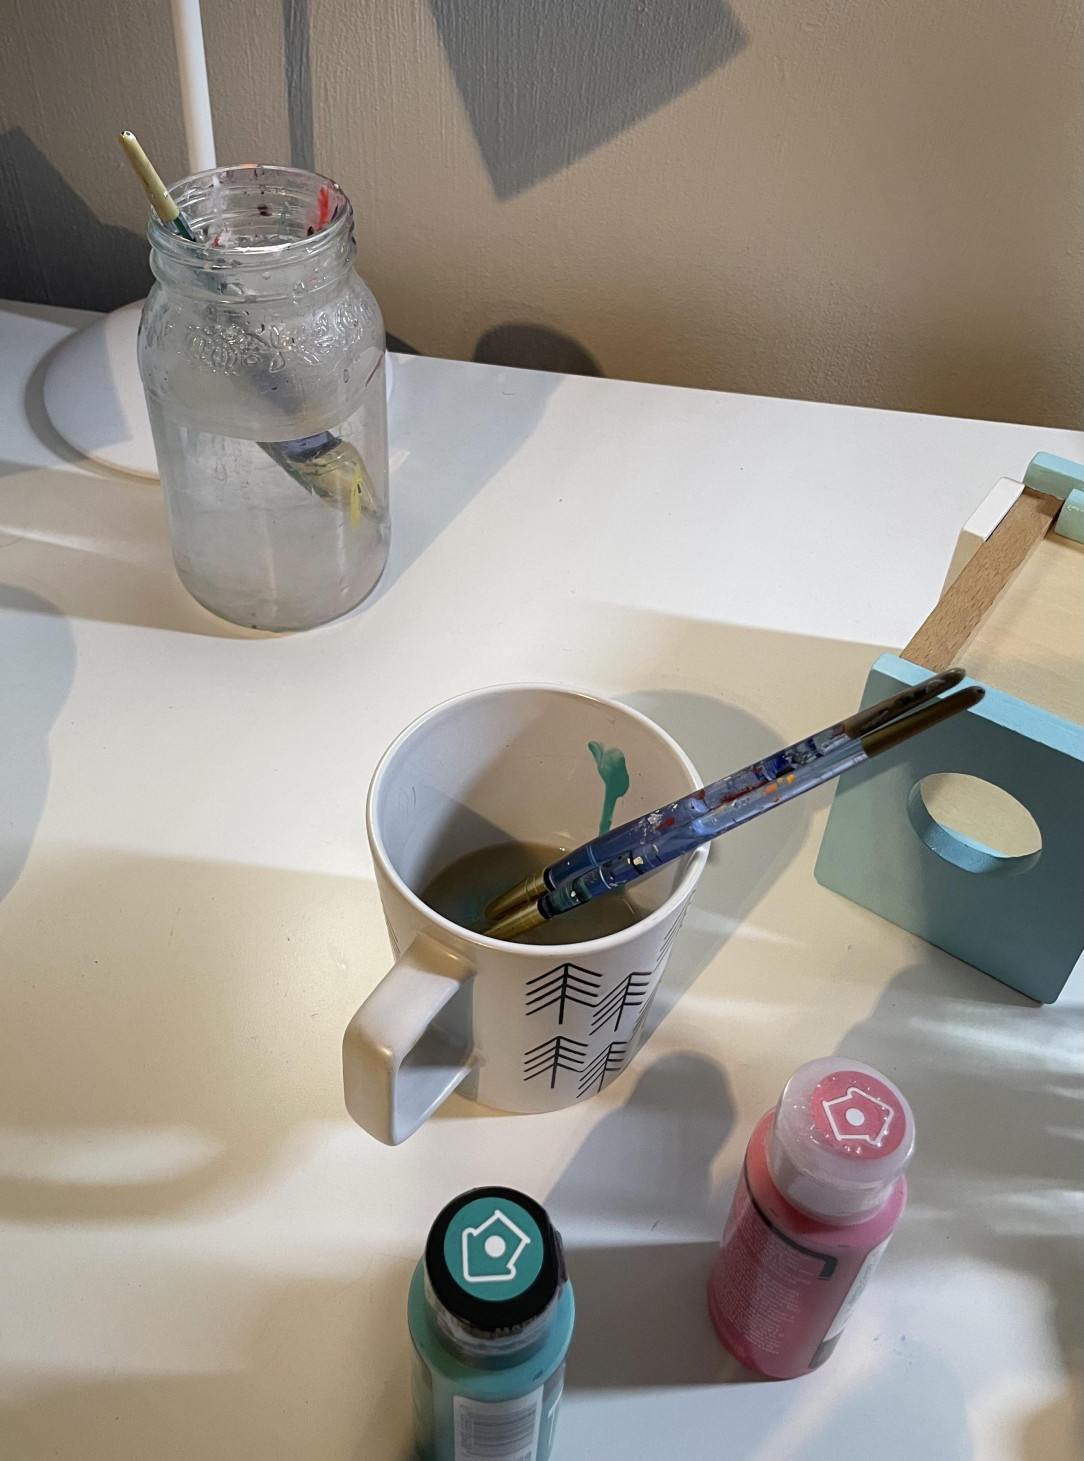 Don’t drink coffee while you are painting